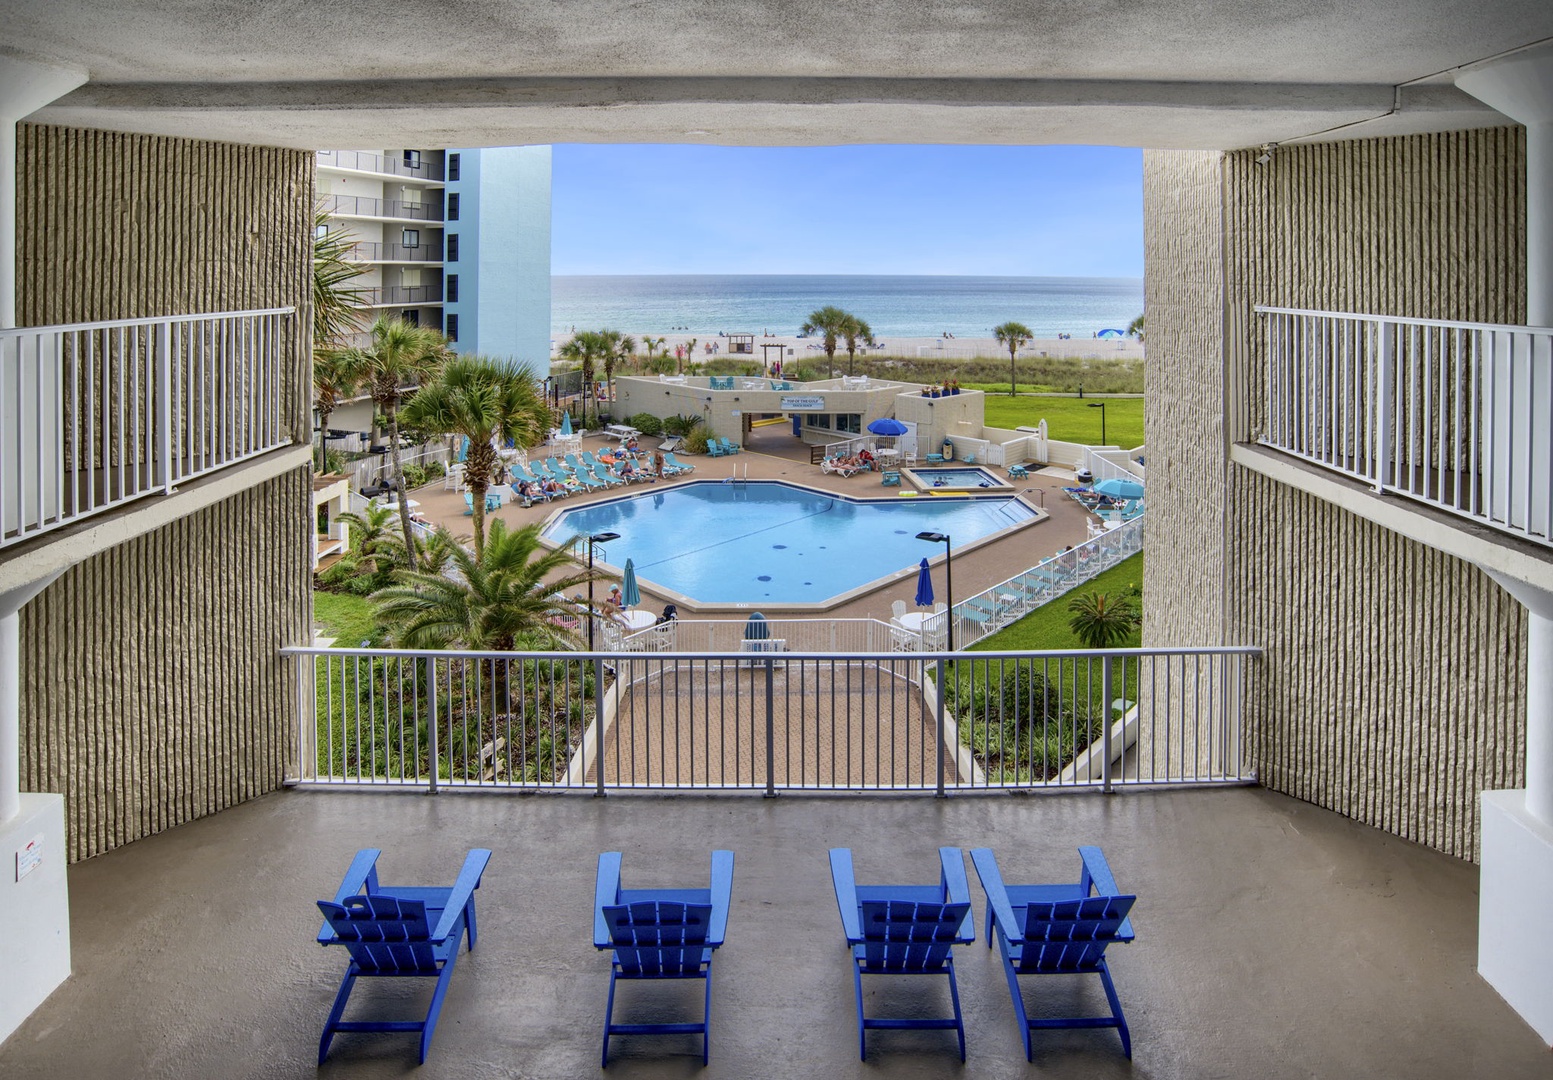 Lounge the day away or make a splash at the sparkling community pool